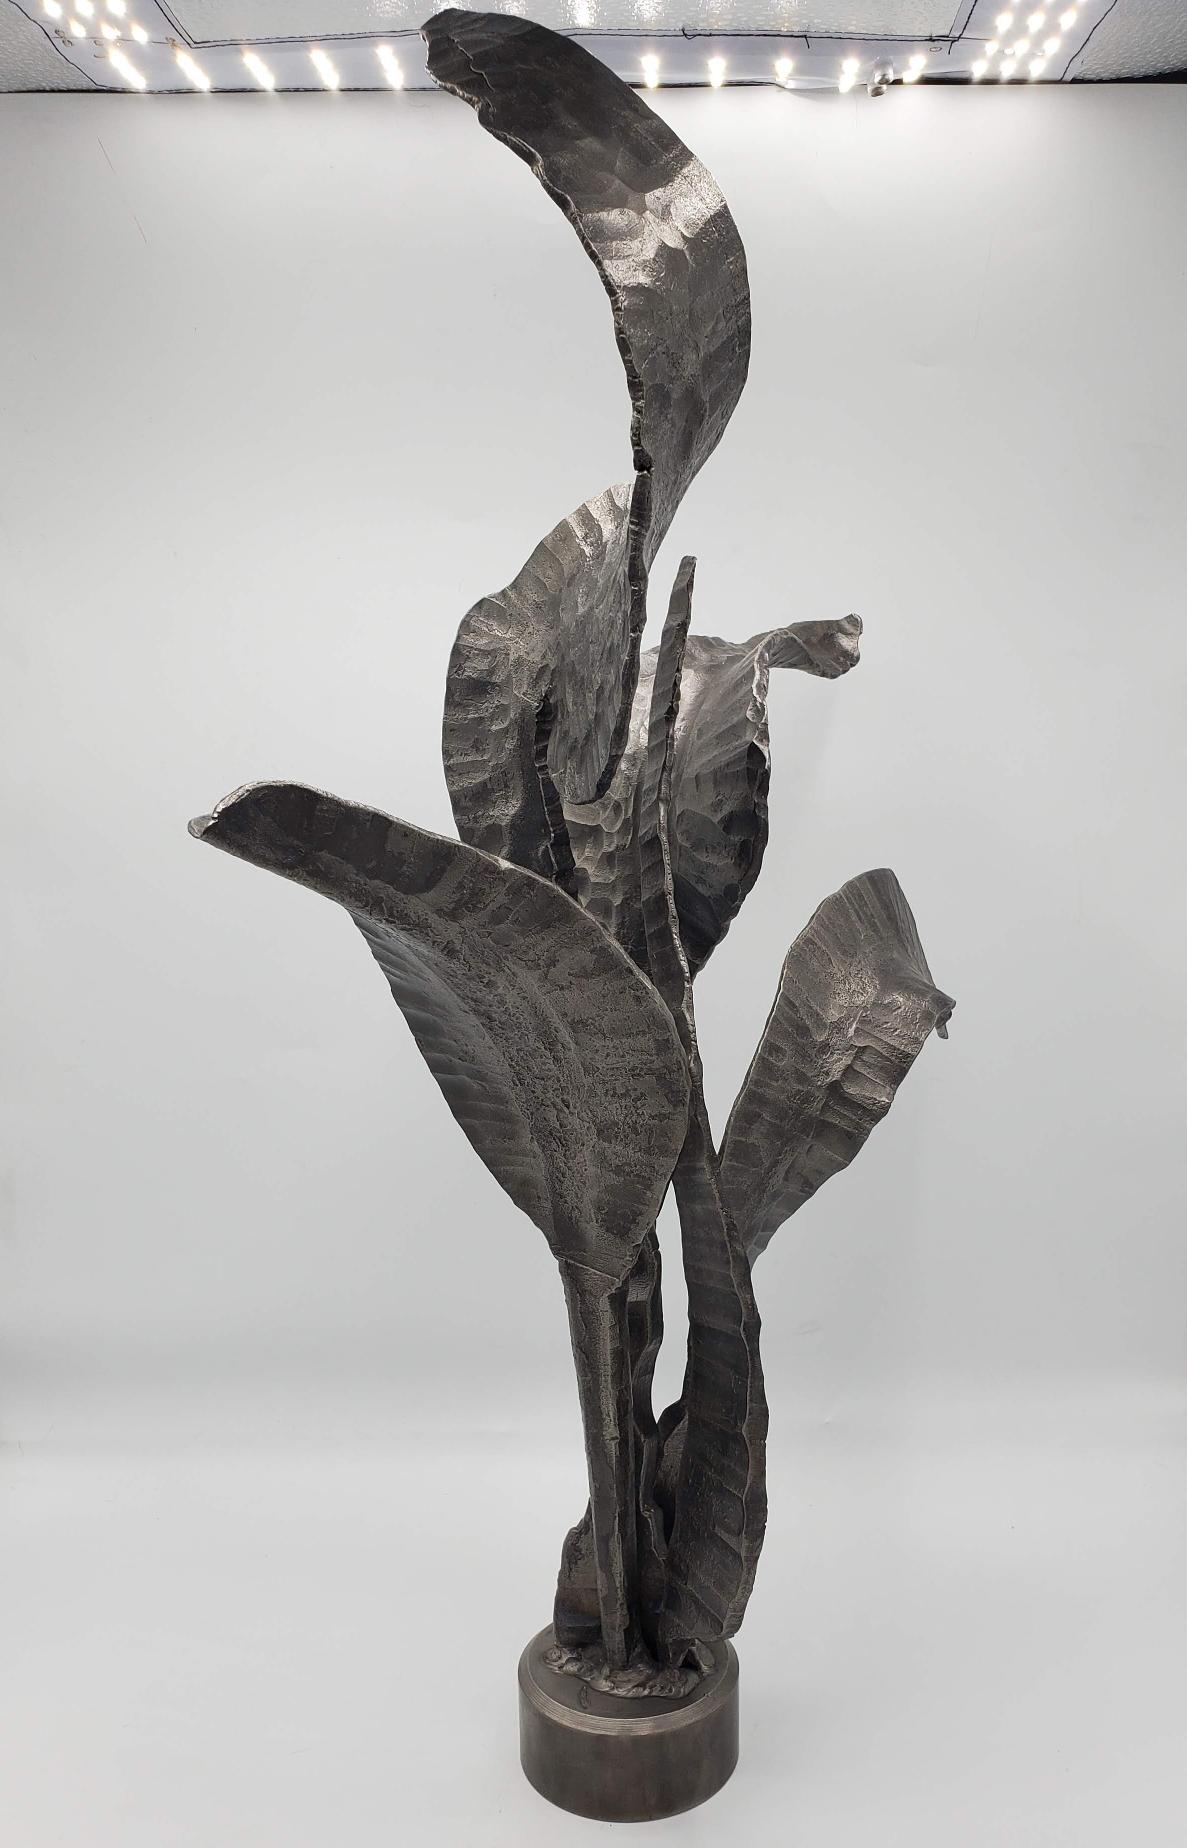 Mid-20th century Abstract flower shaped steel sculpture
Initialed 